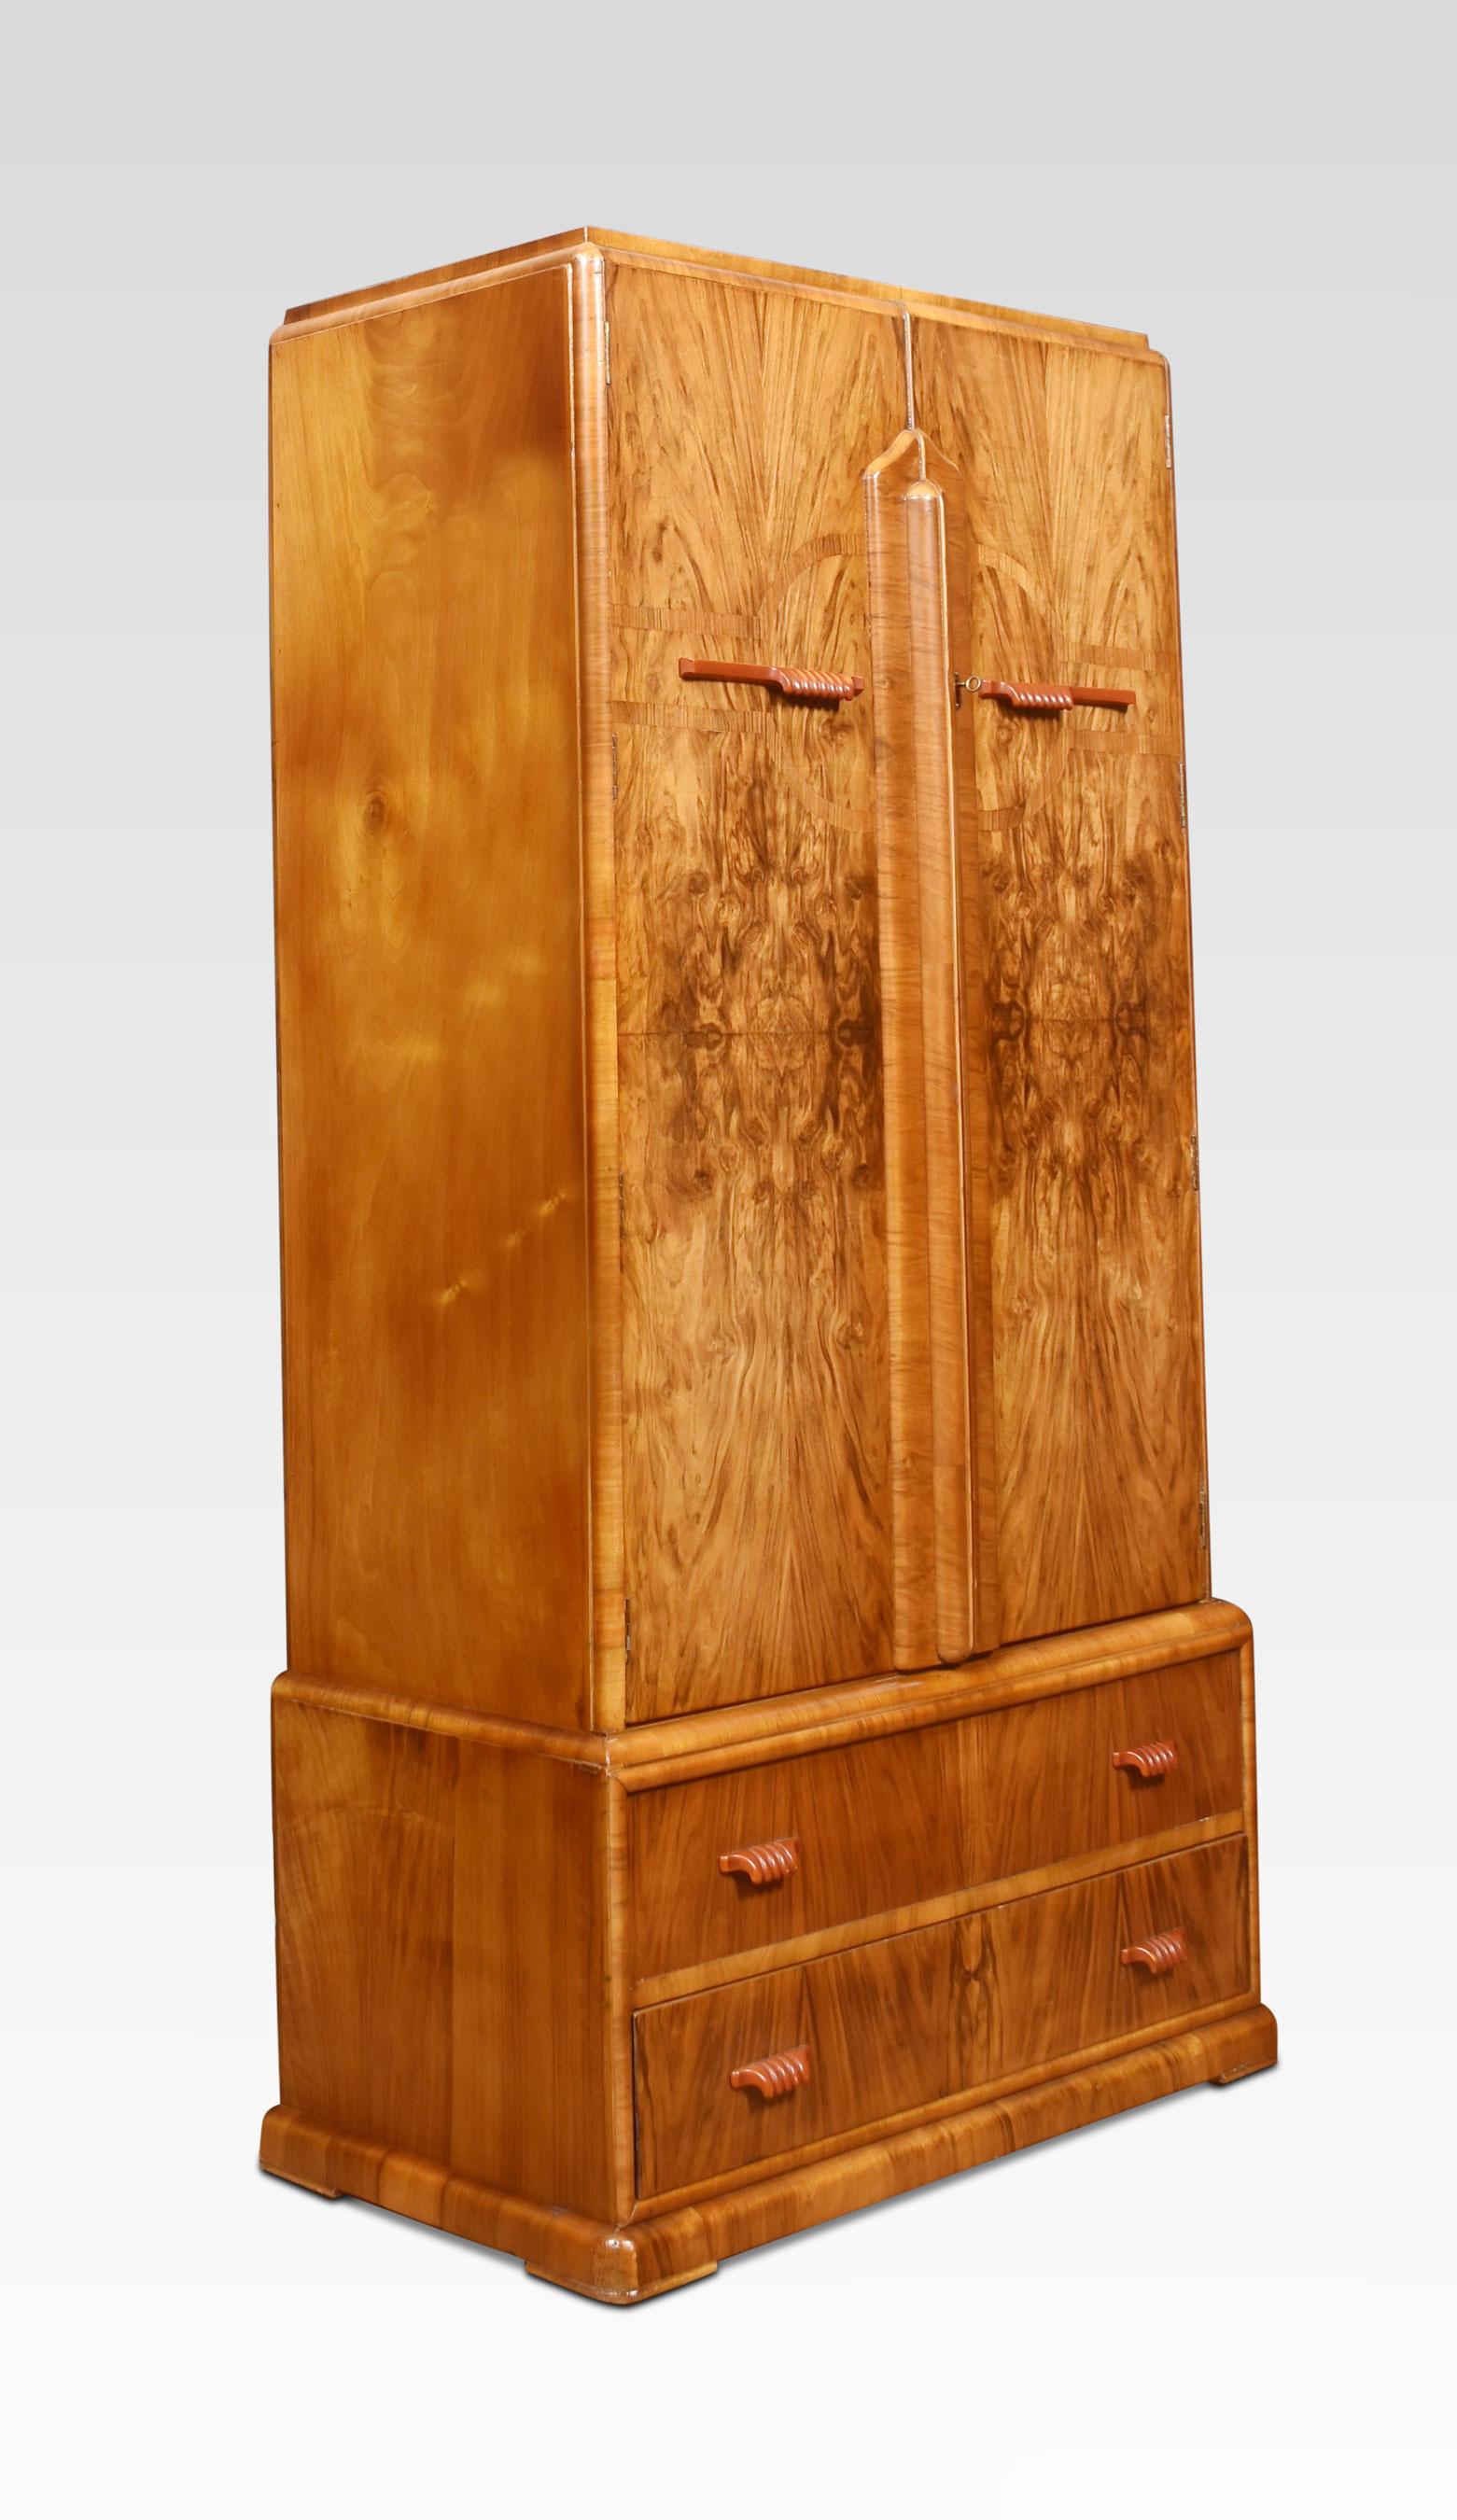 Art deco wardrobe of small proportions, the moulded top above two figured walnut drawers with bakelite handles, opening to reveal fitted interior. The base section is fitted with two drawers with similar bakelite handles. All raised up on a plinth